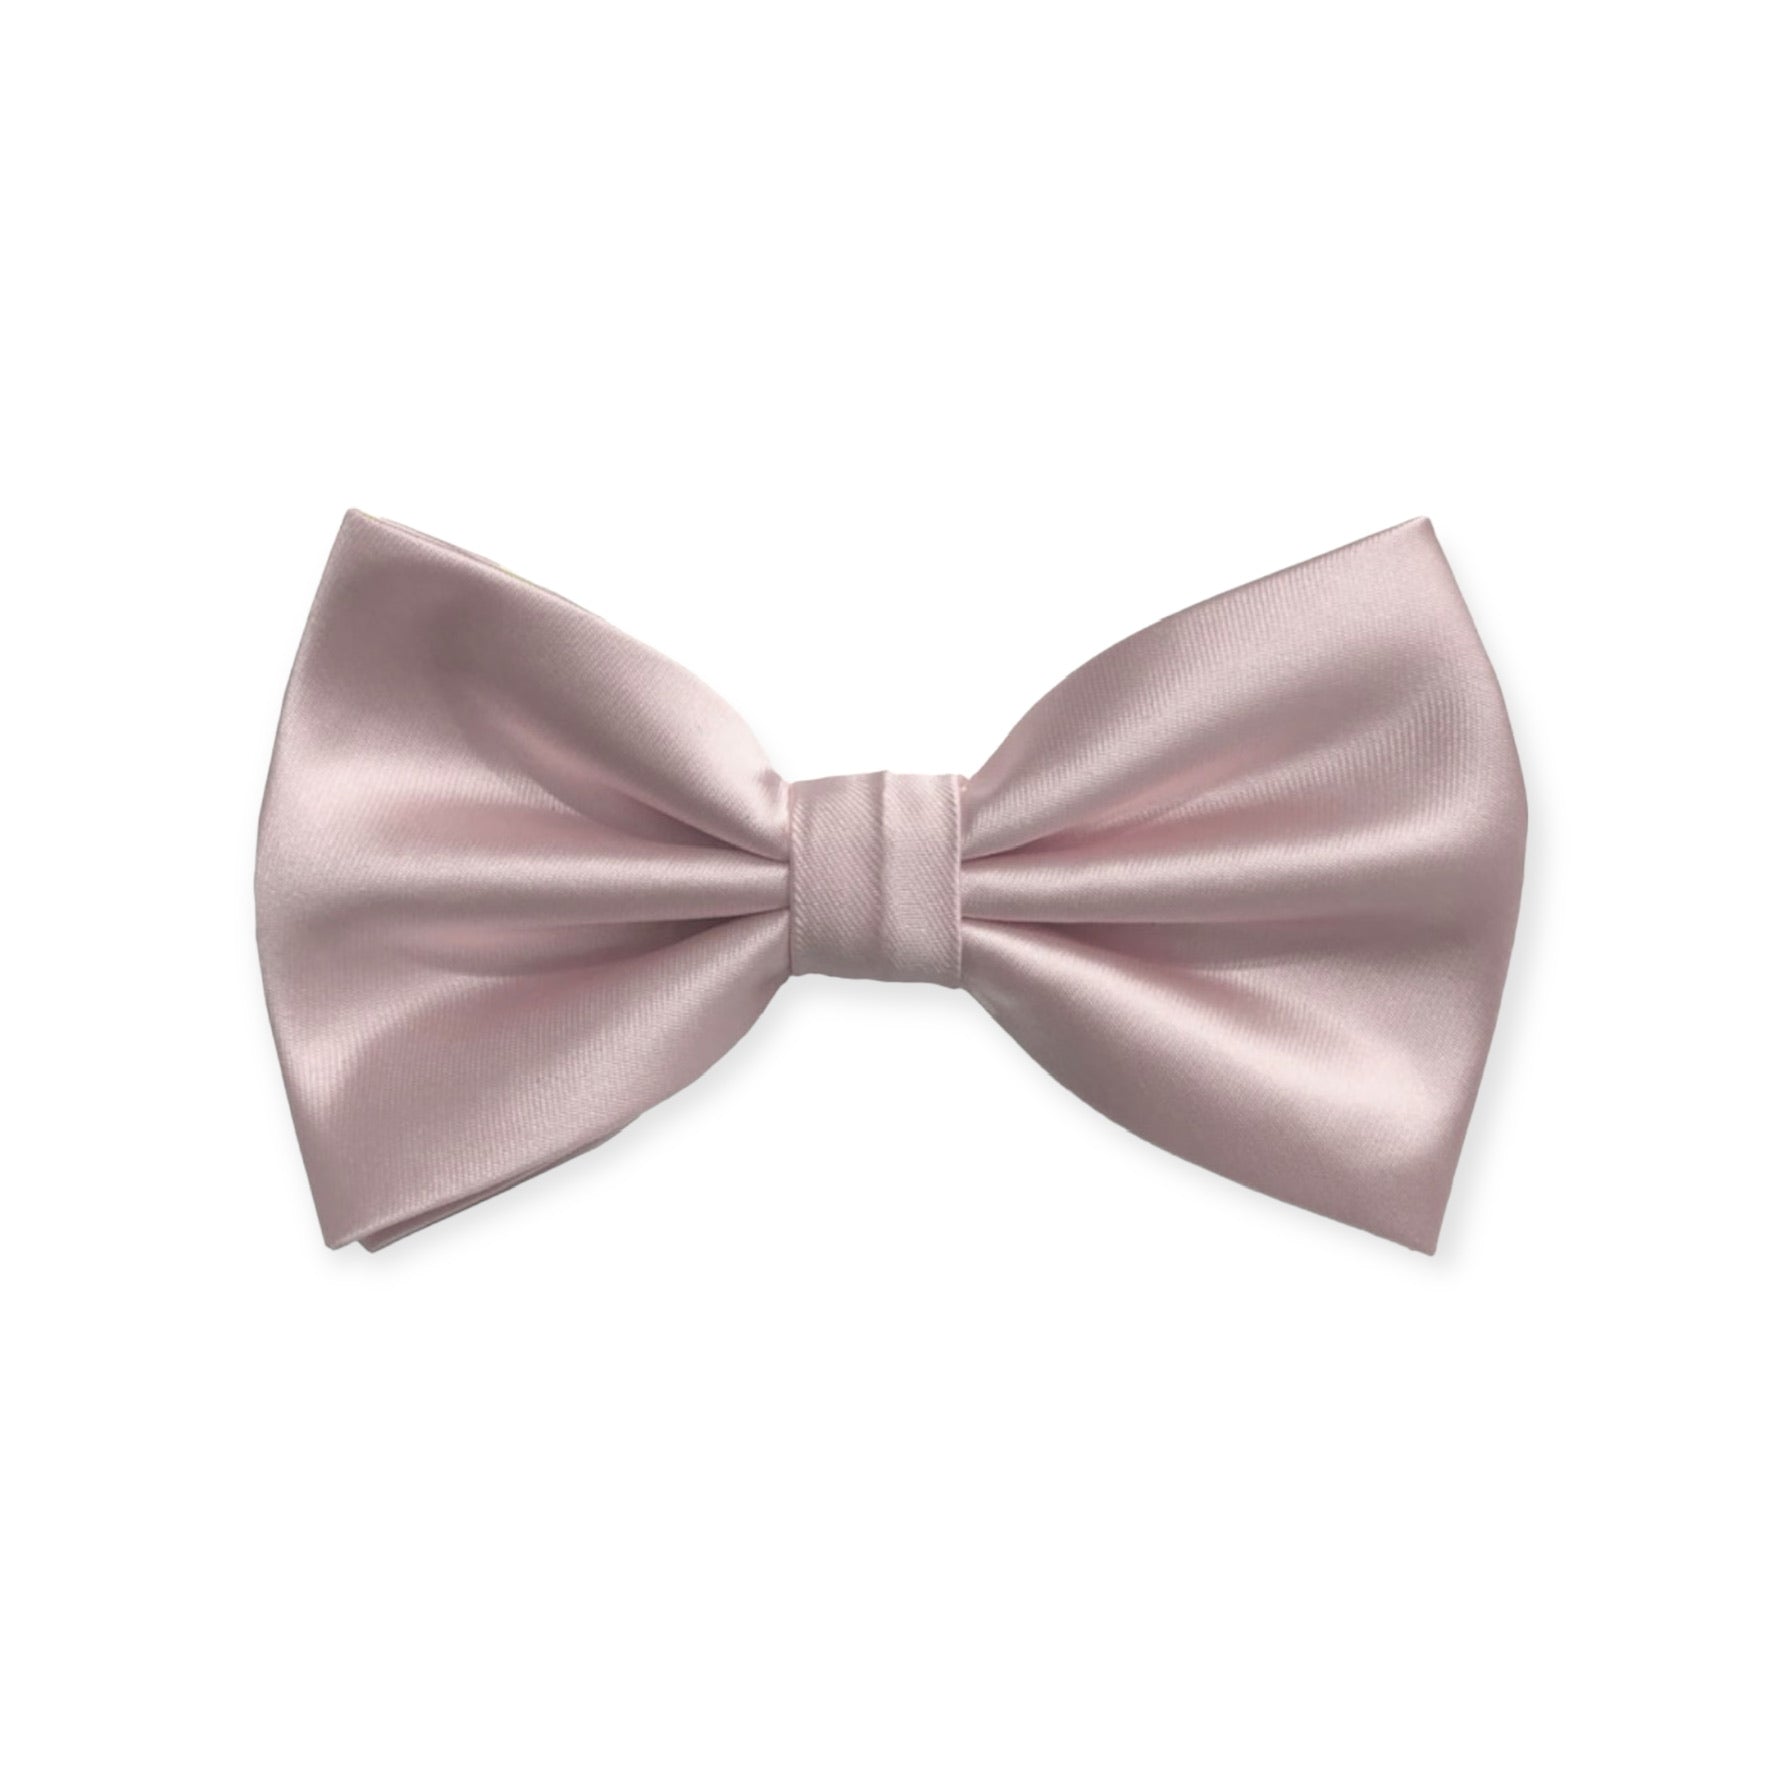 Solid Lt. Pink Bow Tie and Hanky